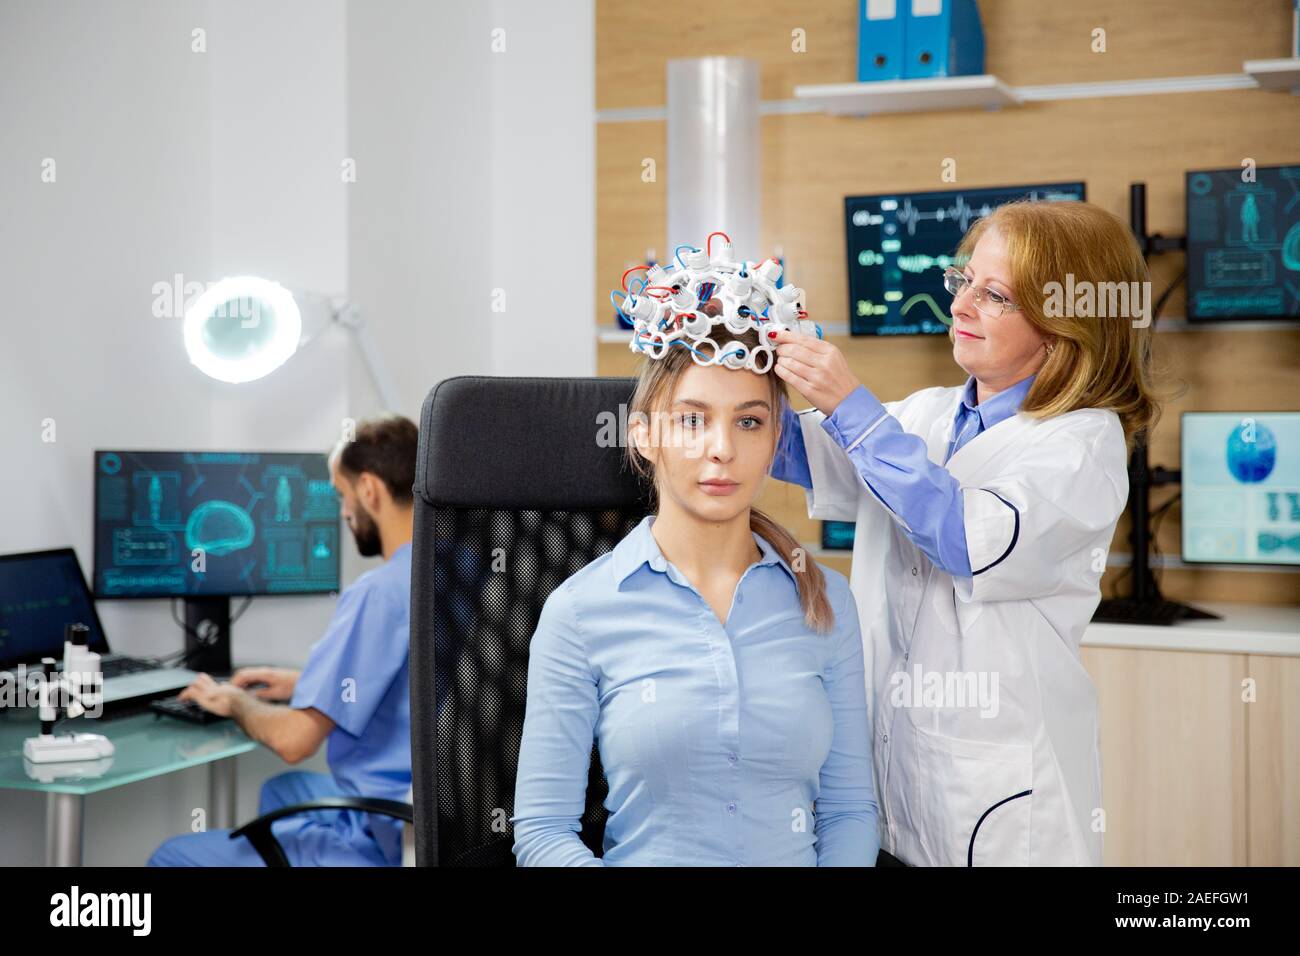 Doctor arranging brain waves scanning headset for a patient. Neurology lab and scanning device Stock Photo